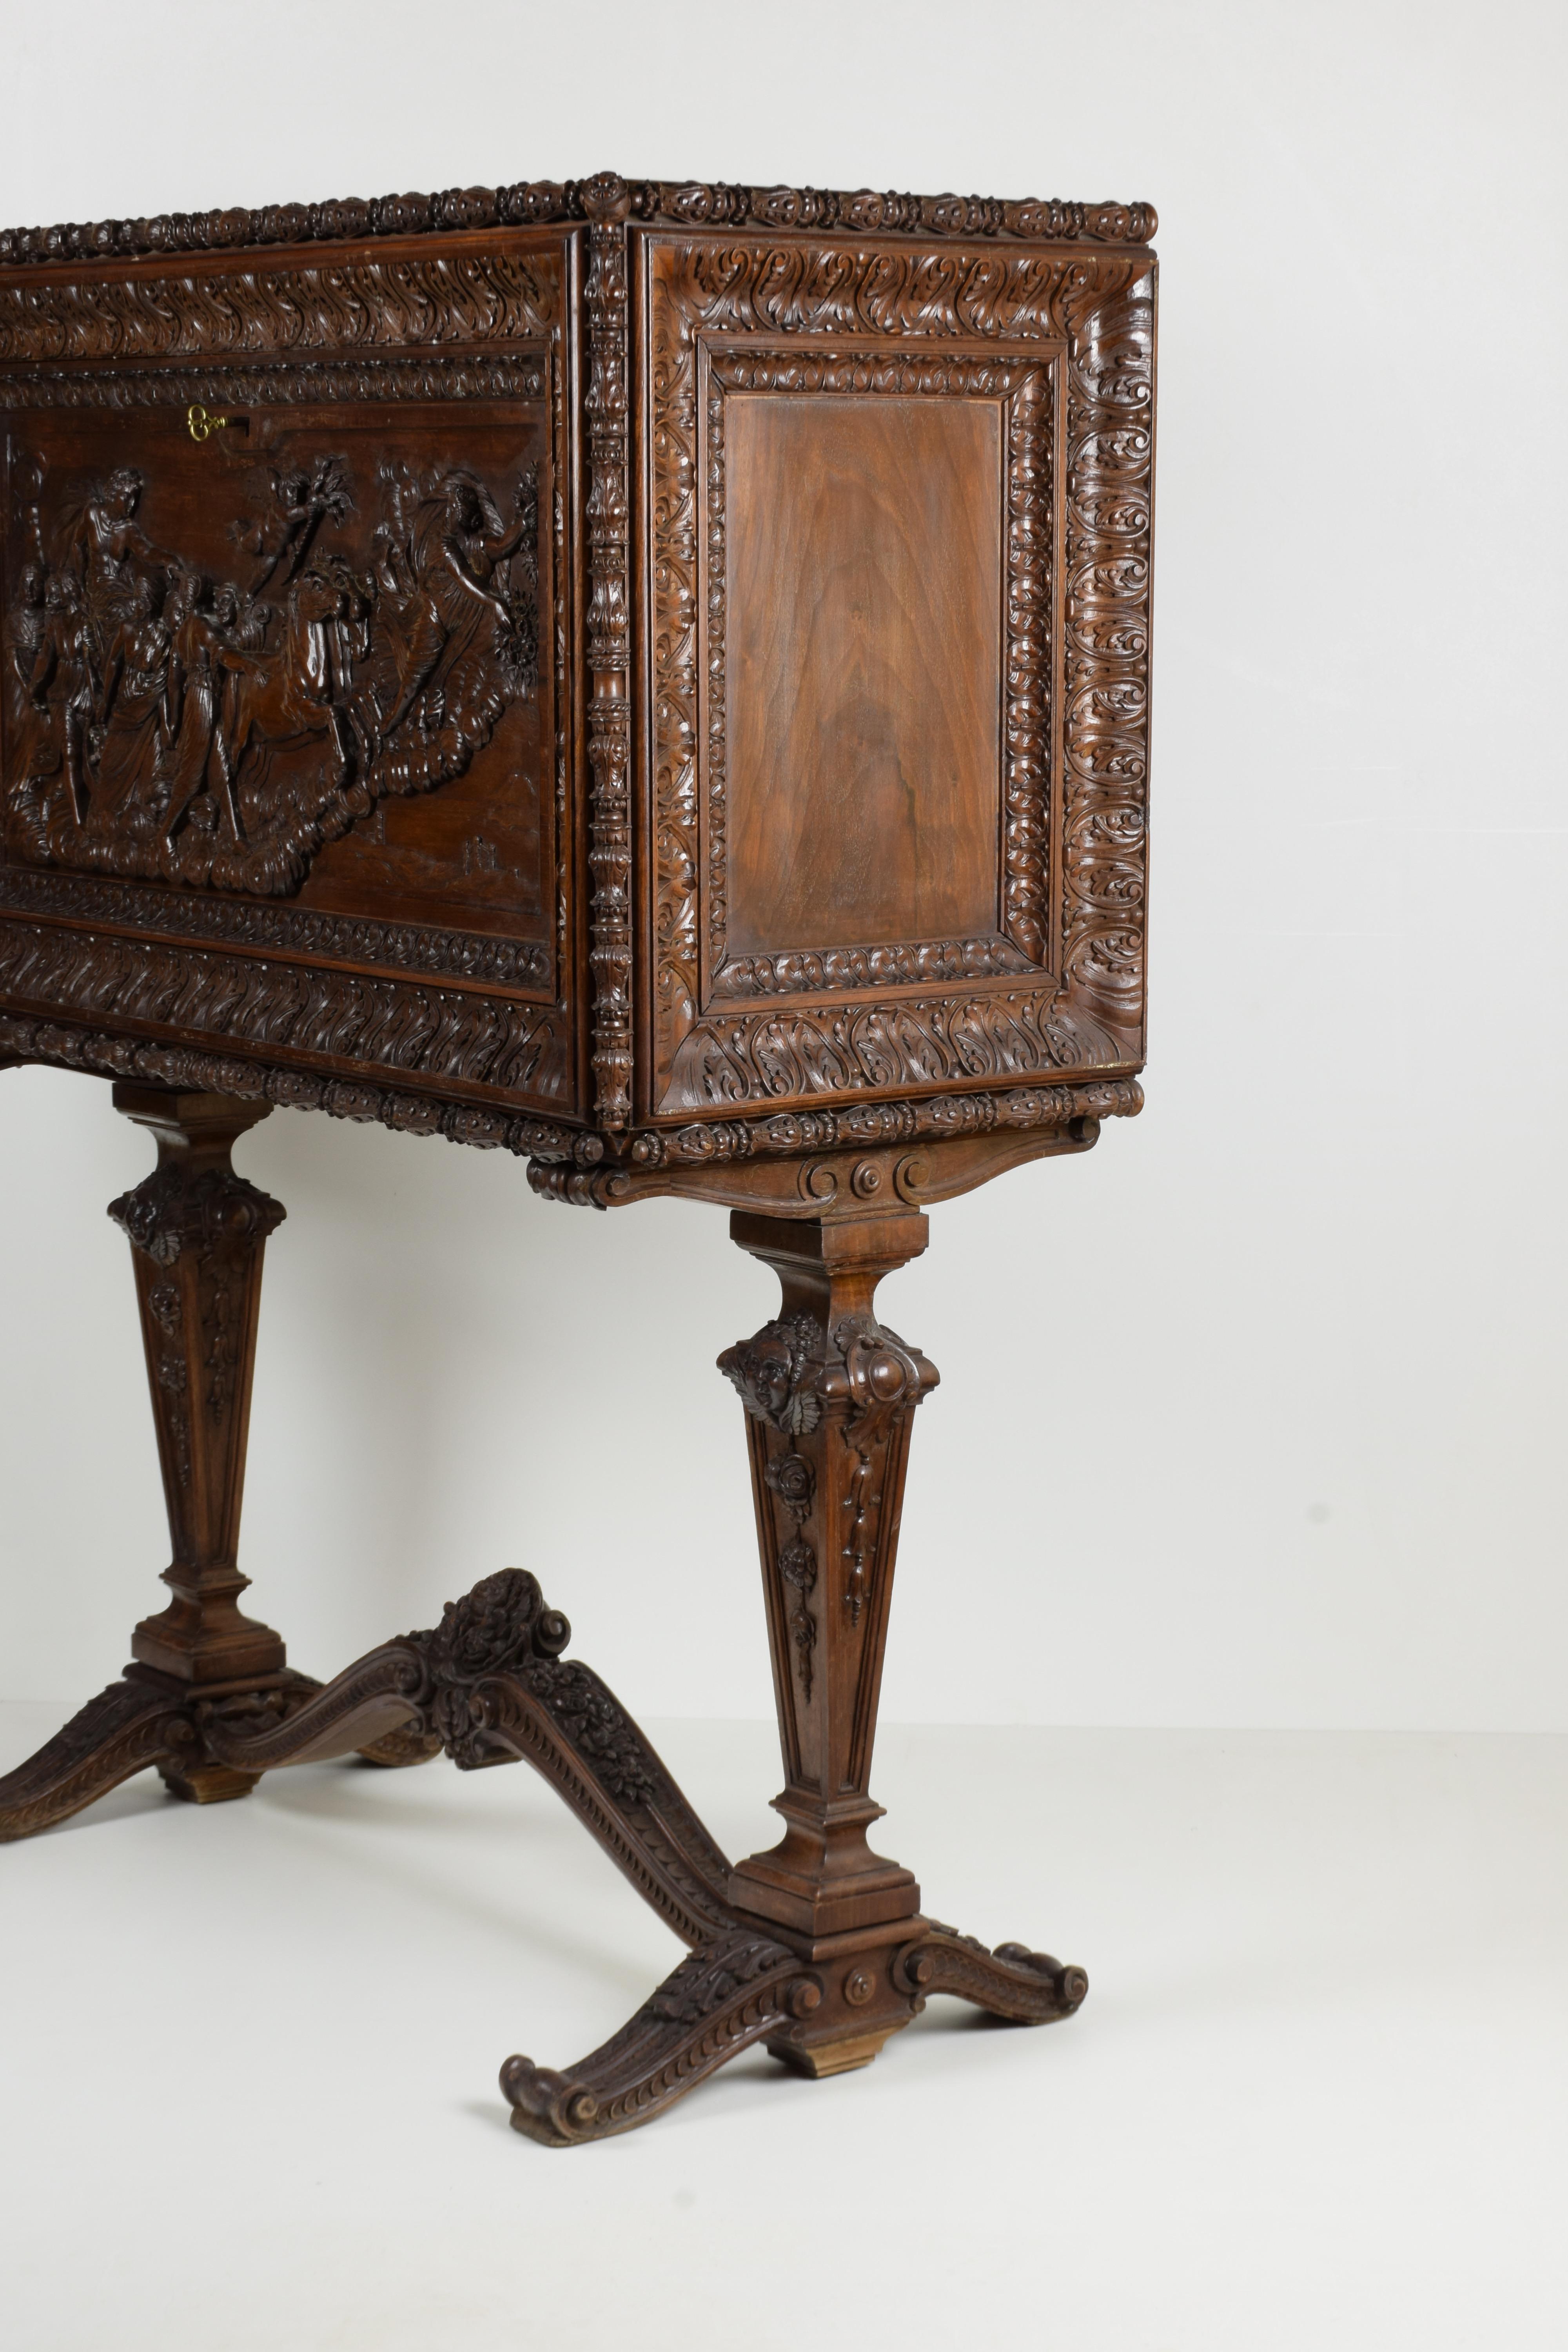 Italian Walnut Dry Bar Cabinet Carved by Hand Depicting the 